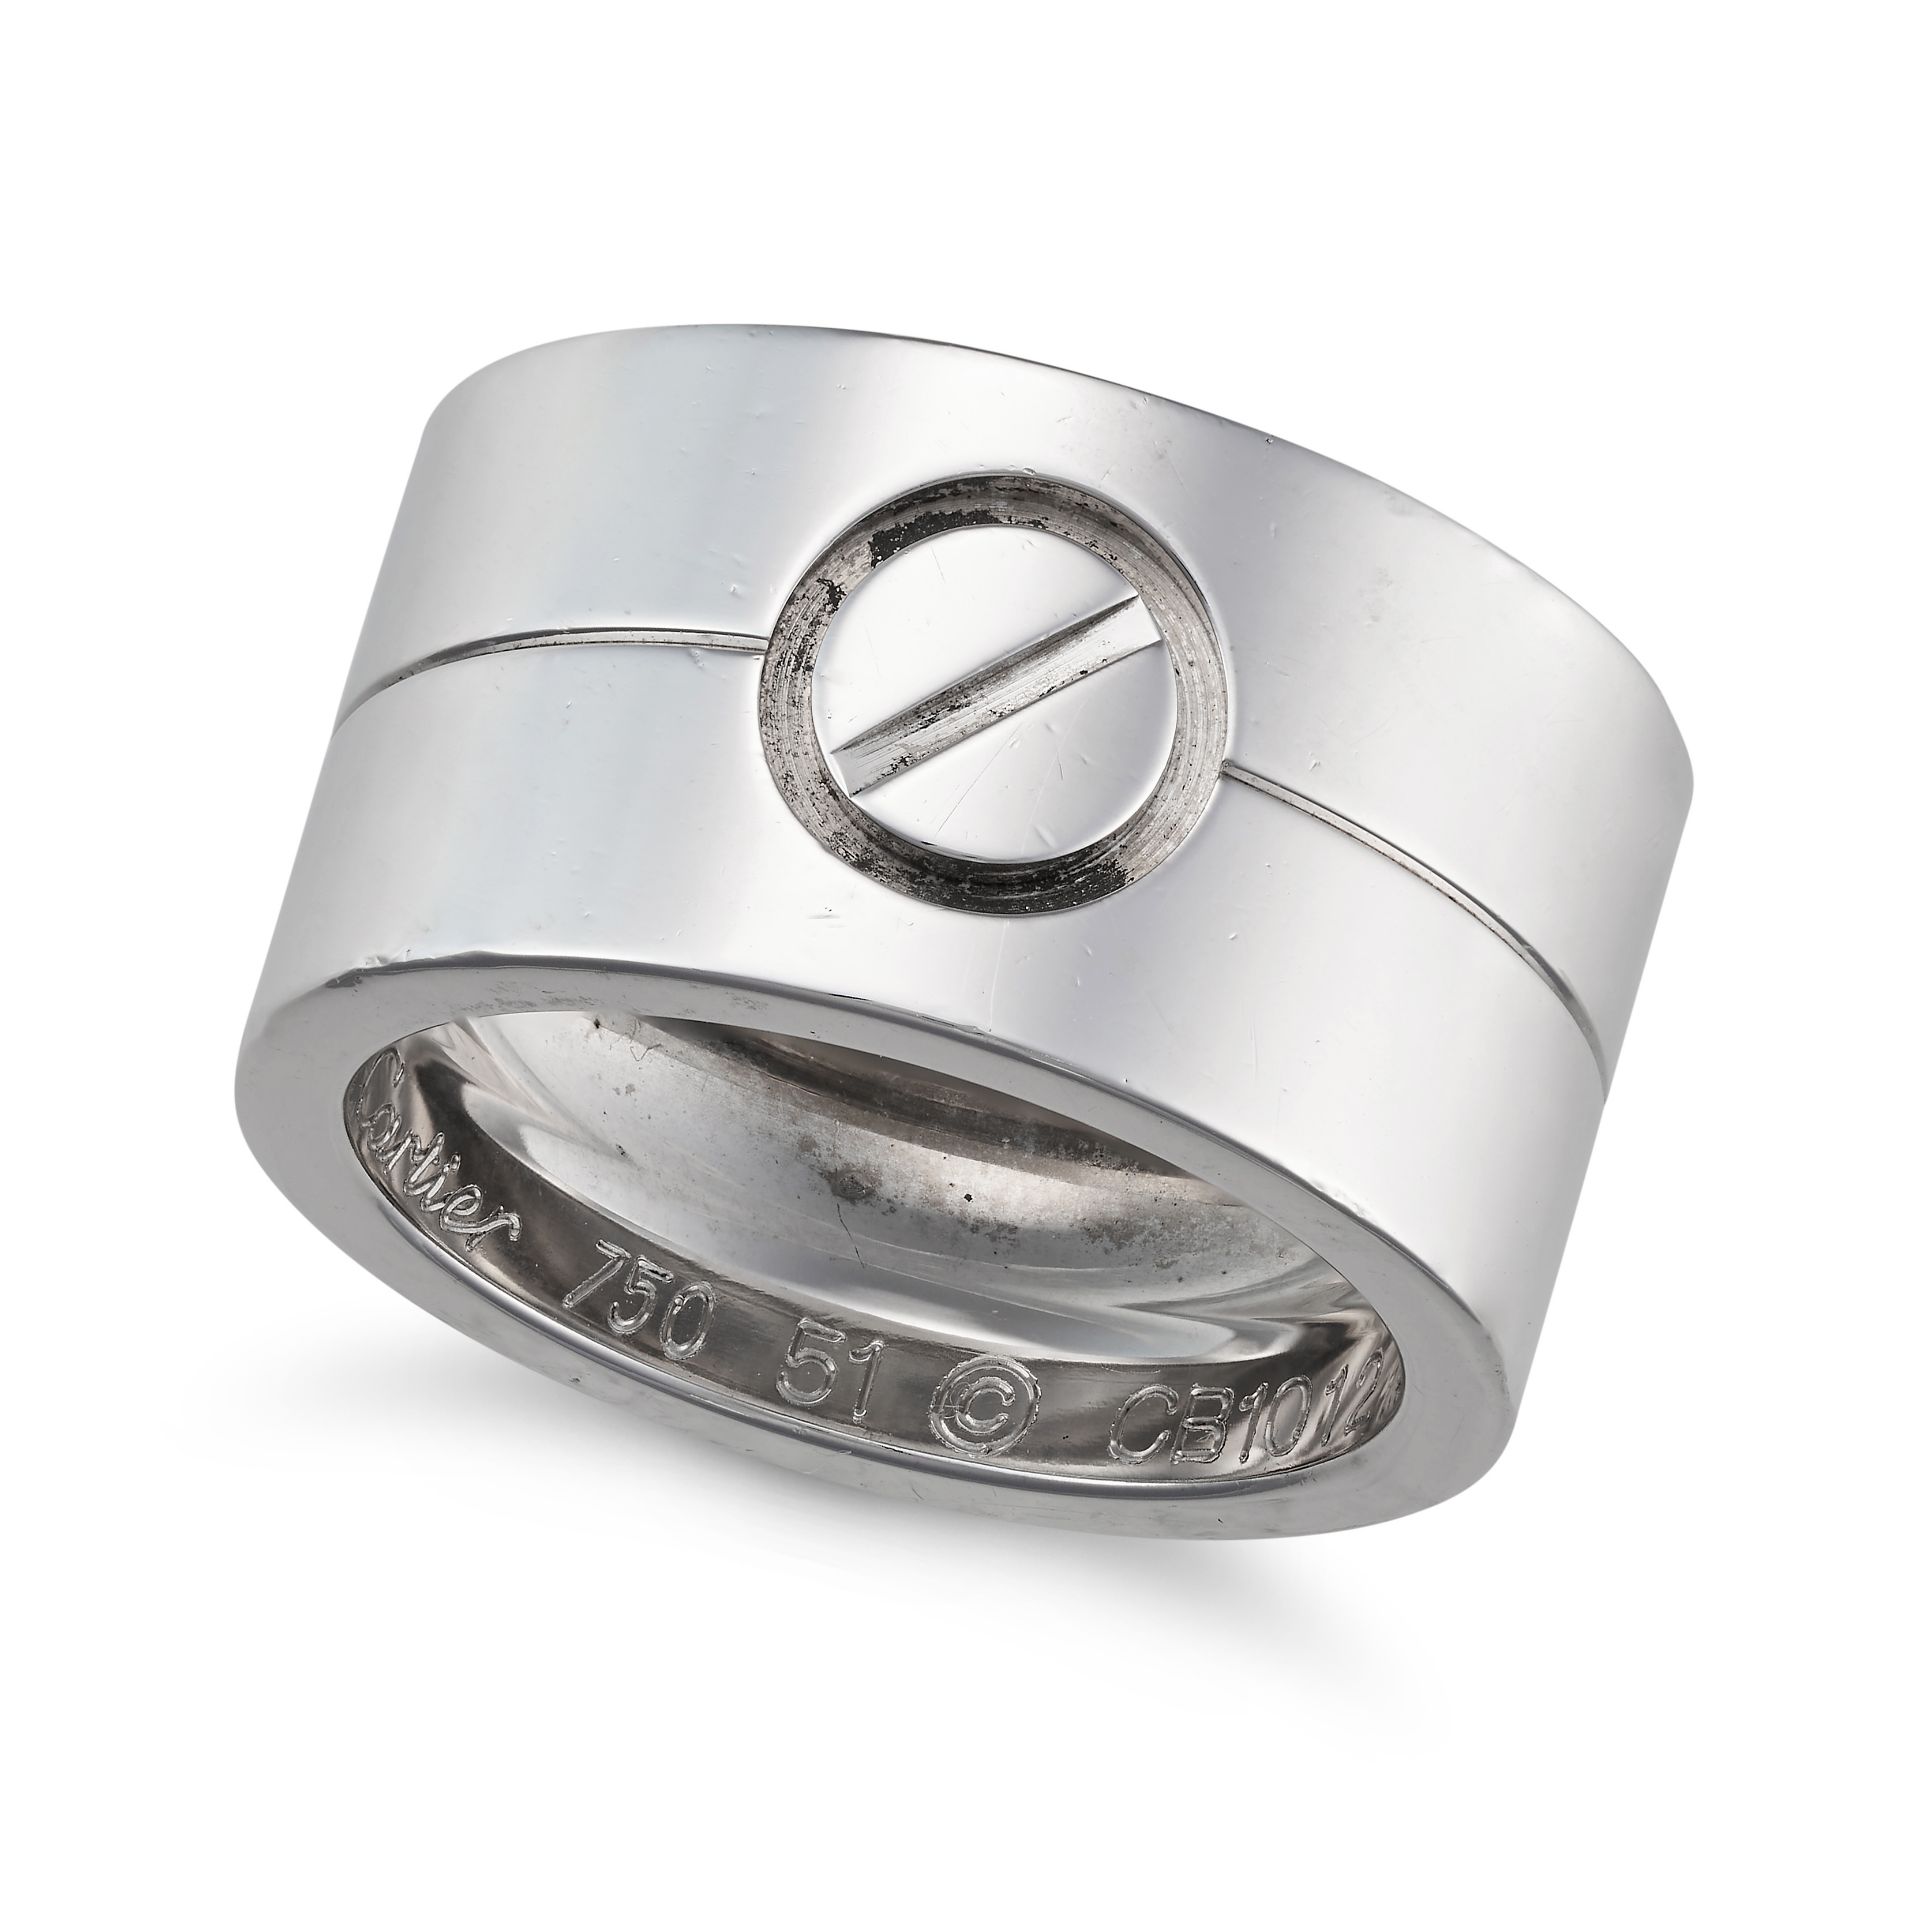 CARTIER, A WIDE LOVE RING in 18ct white gold, the wide band with a single screw motif, signed Car... - Image 2 of 2